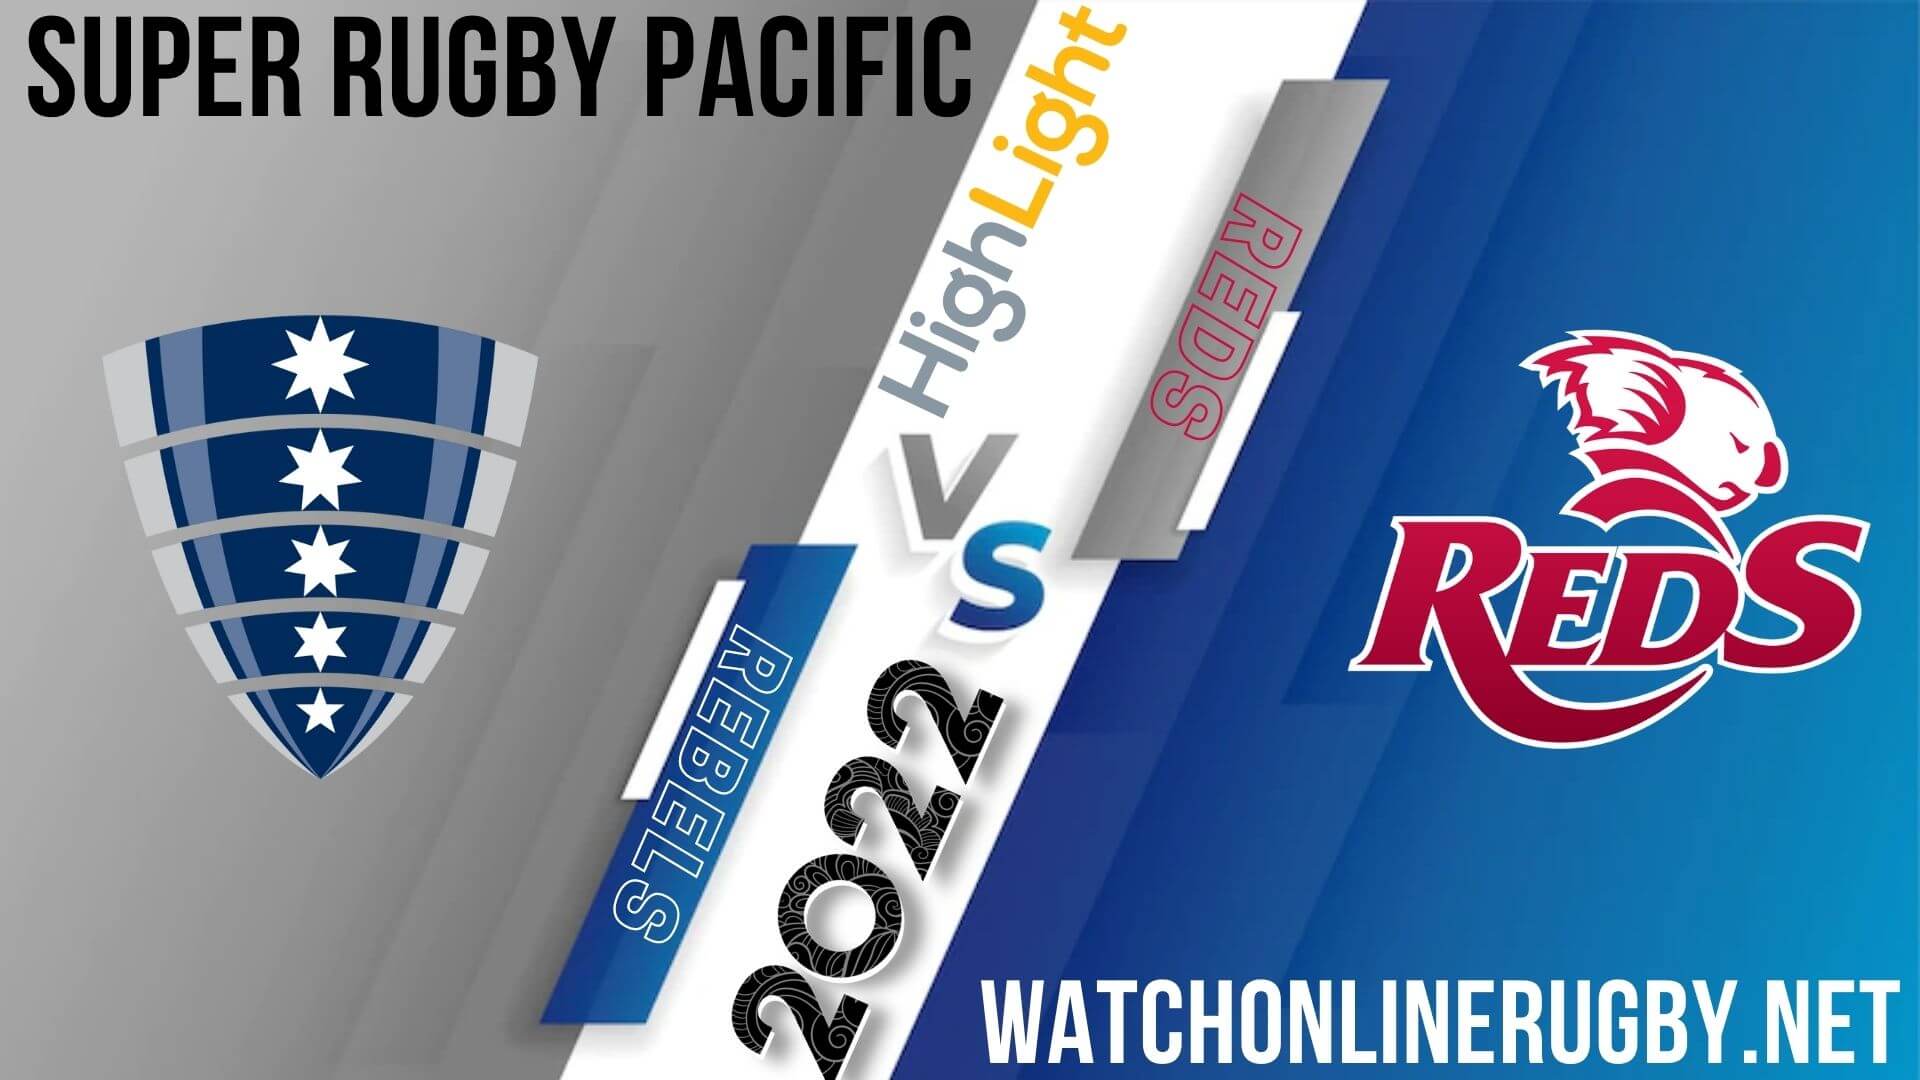 Rebels Vs Reds Super Rugby Pacific 2022 RD 9